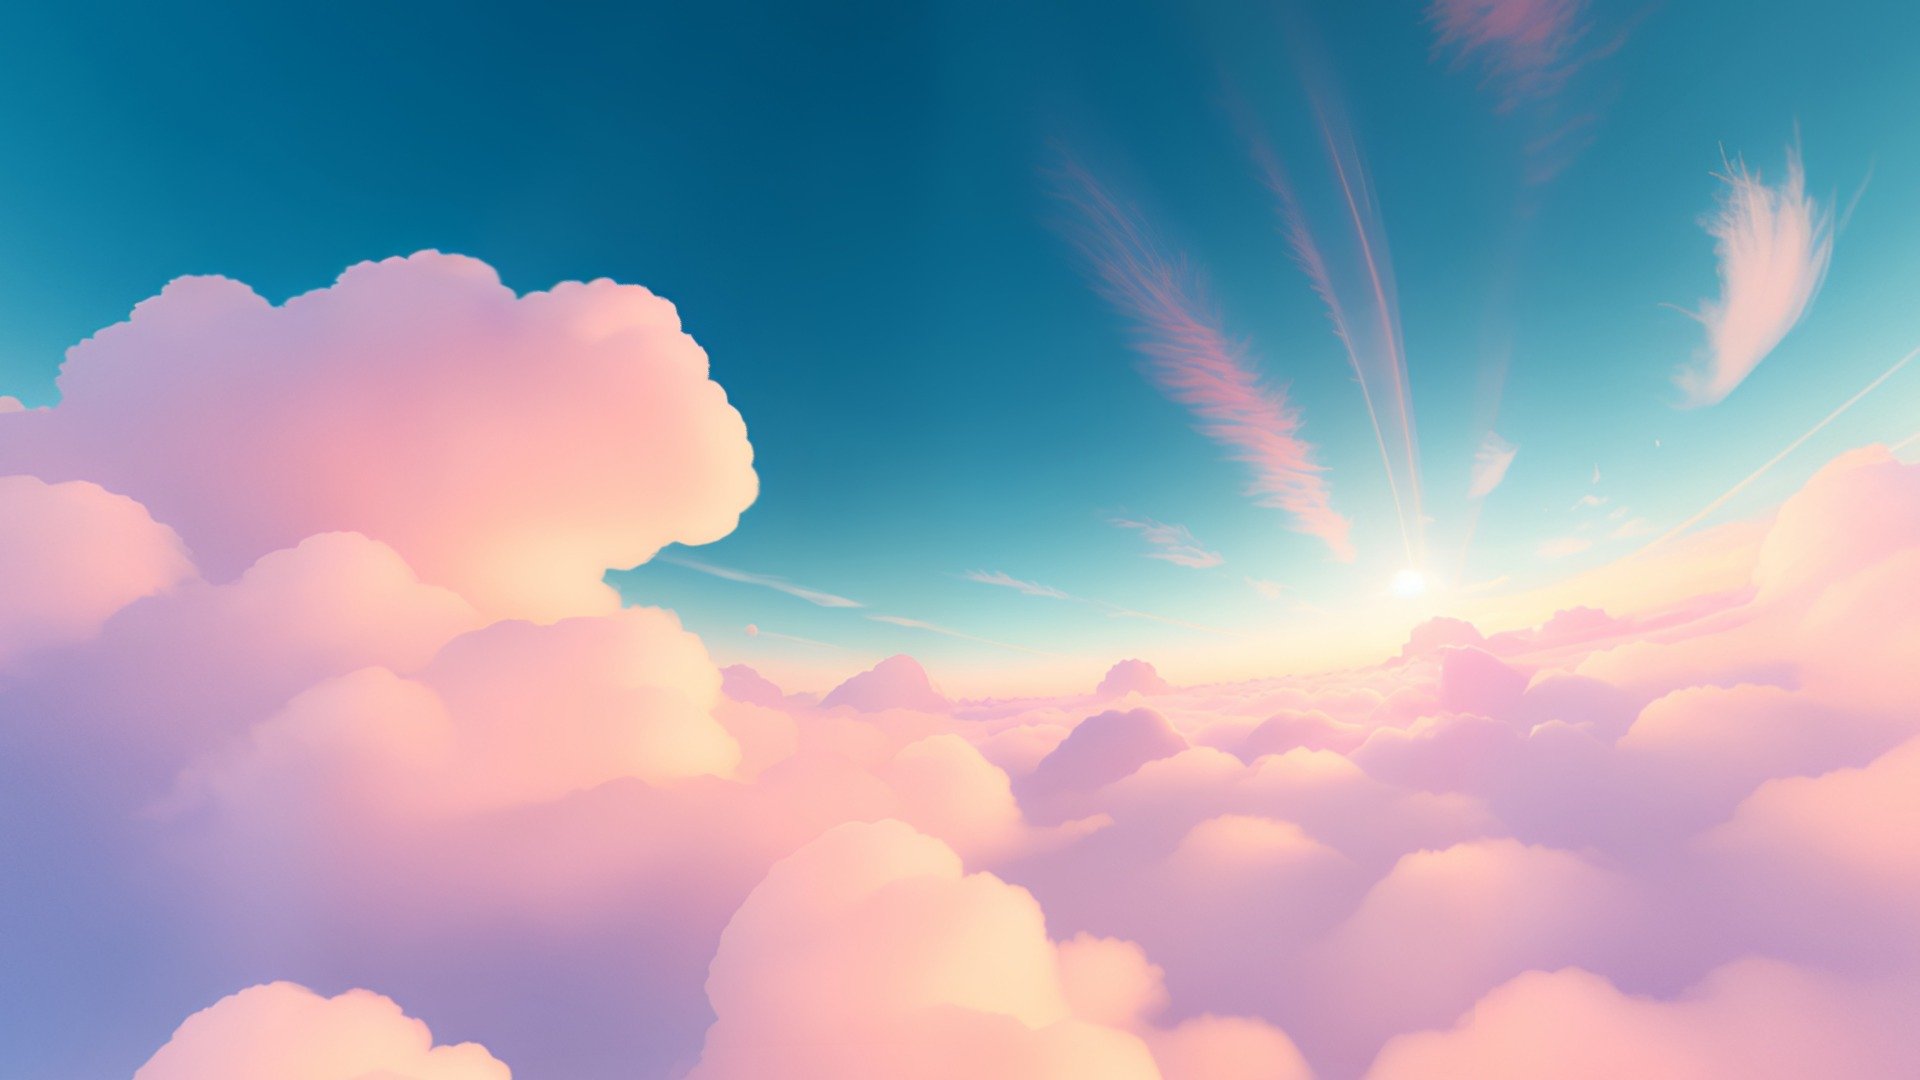 Beautiful stylized dreamy skybox. Perfect for beautiful, stylized environments and your rendering scene.

The package contains one panorama texture and one cubemap texture (png)

panorama texture: 8192 x 4096 

cubemap texture: 6144 x 4608 

Because of this size it is easier to customize more and better details if you want that. 

The sizes can be changed in your graphics program as desired

( textures are under Other available downloads)

used: AI, Photoshop

*-------------Terms of Use--------------

Commercial use of the assets provided is permitted but cannot be included in an asset pack or sold at any sort of asset/resource marketplace or be shared for free* - Stylized Cloudy Sky 010 - Buy Royalty Free 3D model by stylized skybox (@skybox_) 3d model